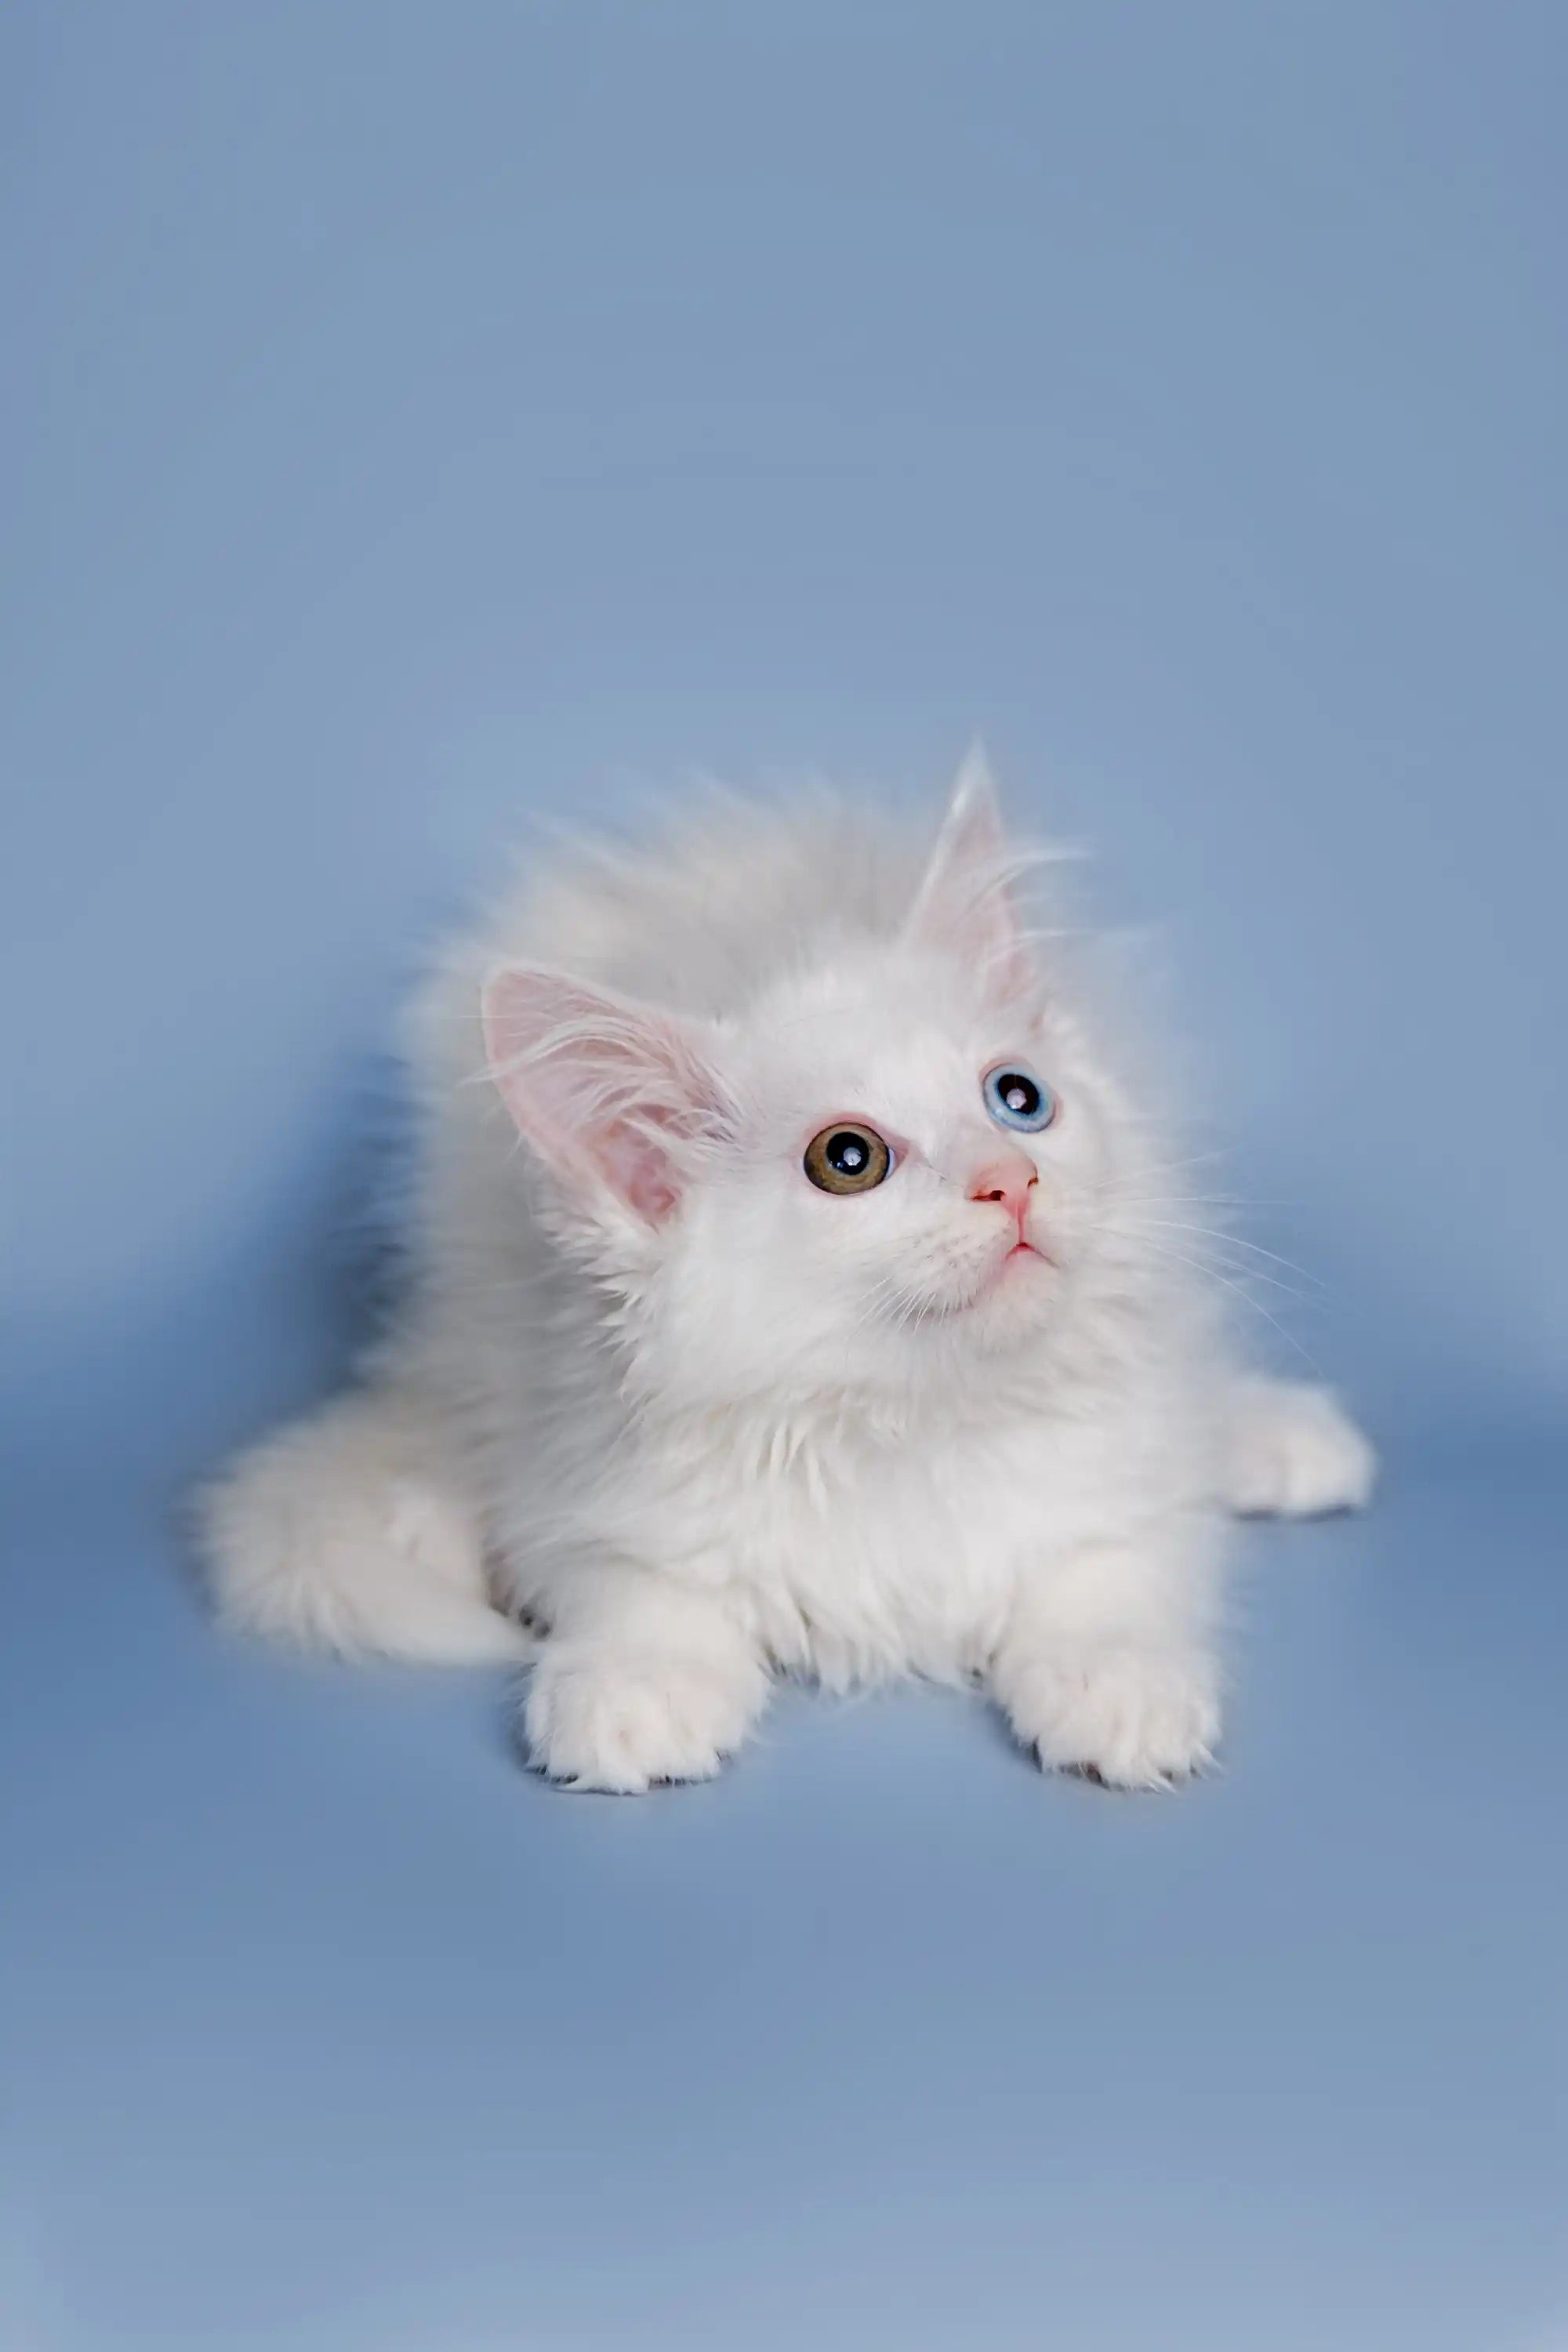 Maine Coon Kittens and Cats for Sale Diana | Kitten